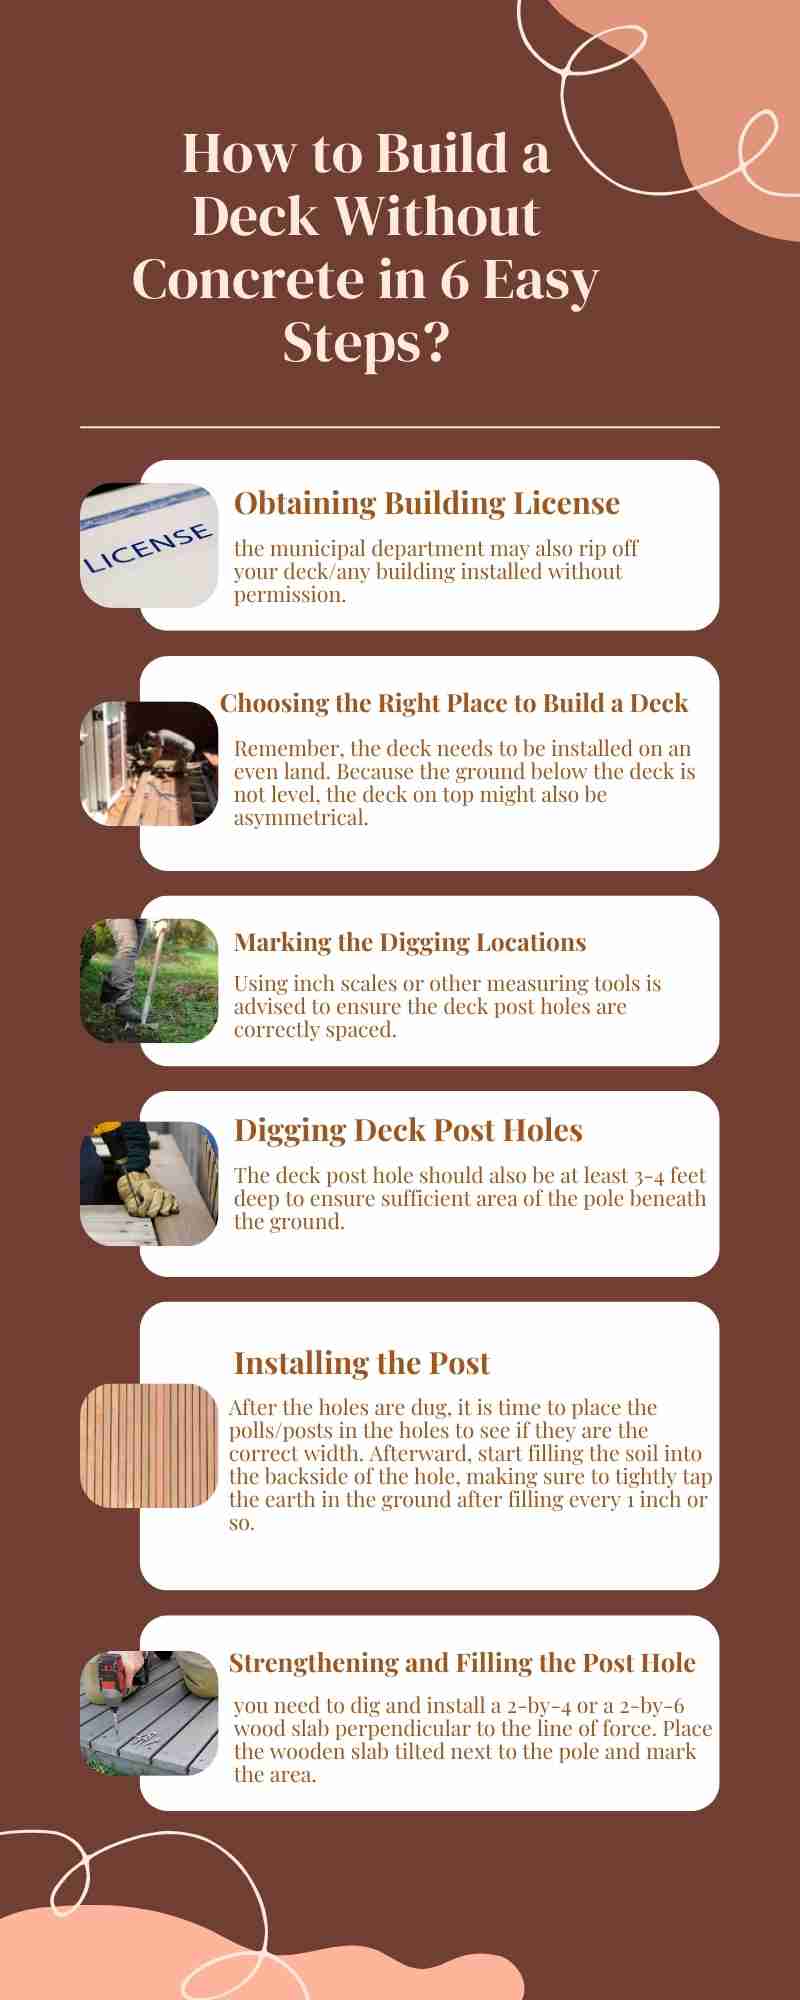 How to Build a Deck Without Concrete in 6 Easy Steps